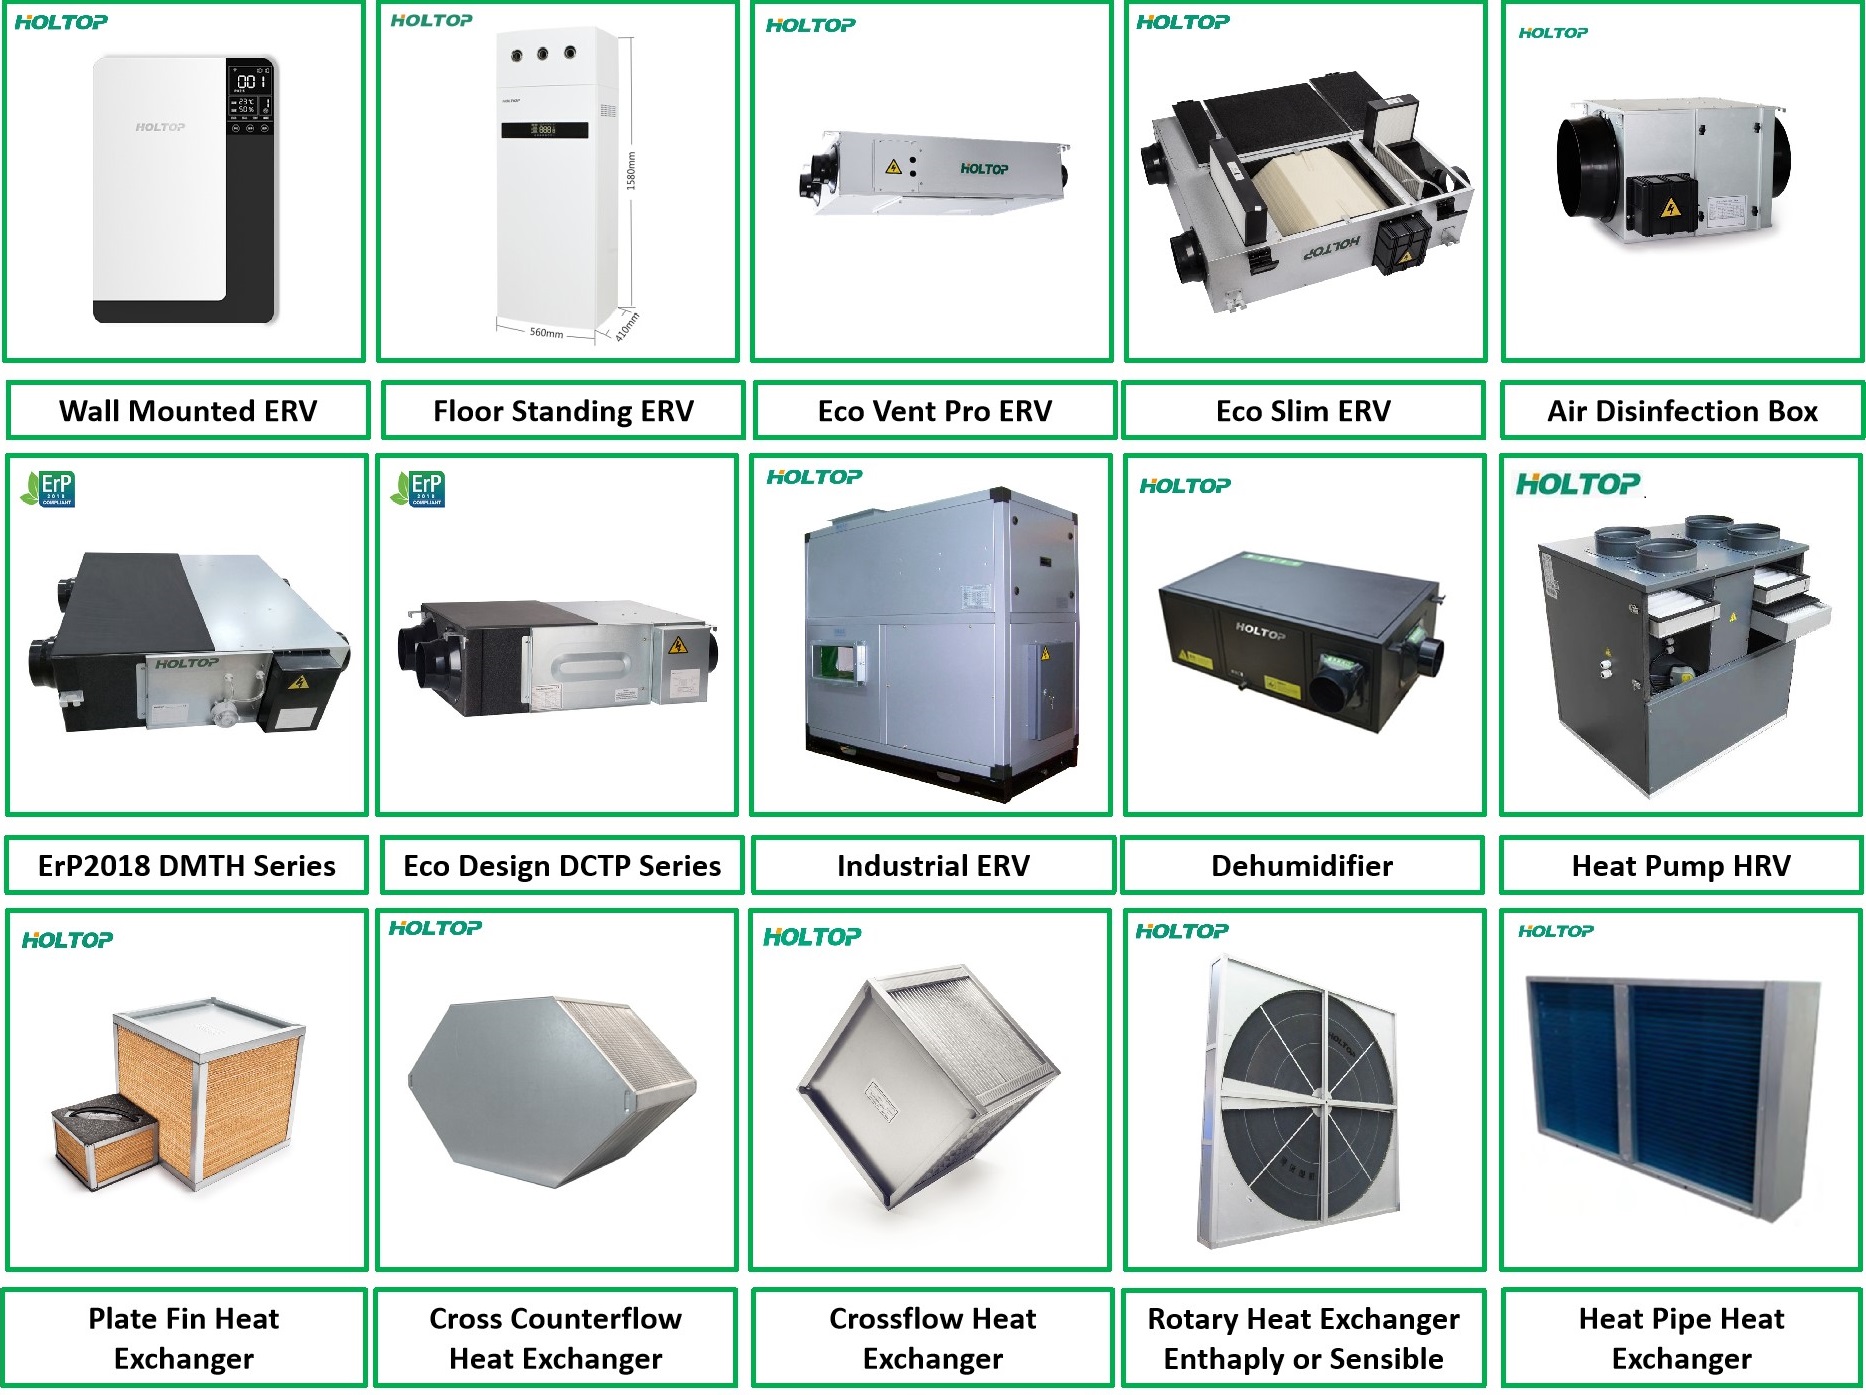 Energy Recovery Ventilator products